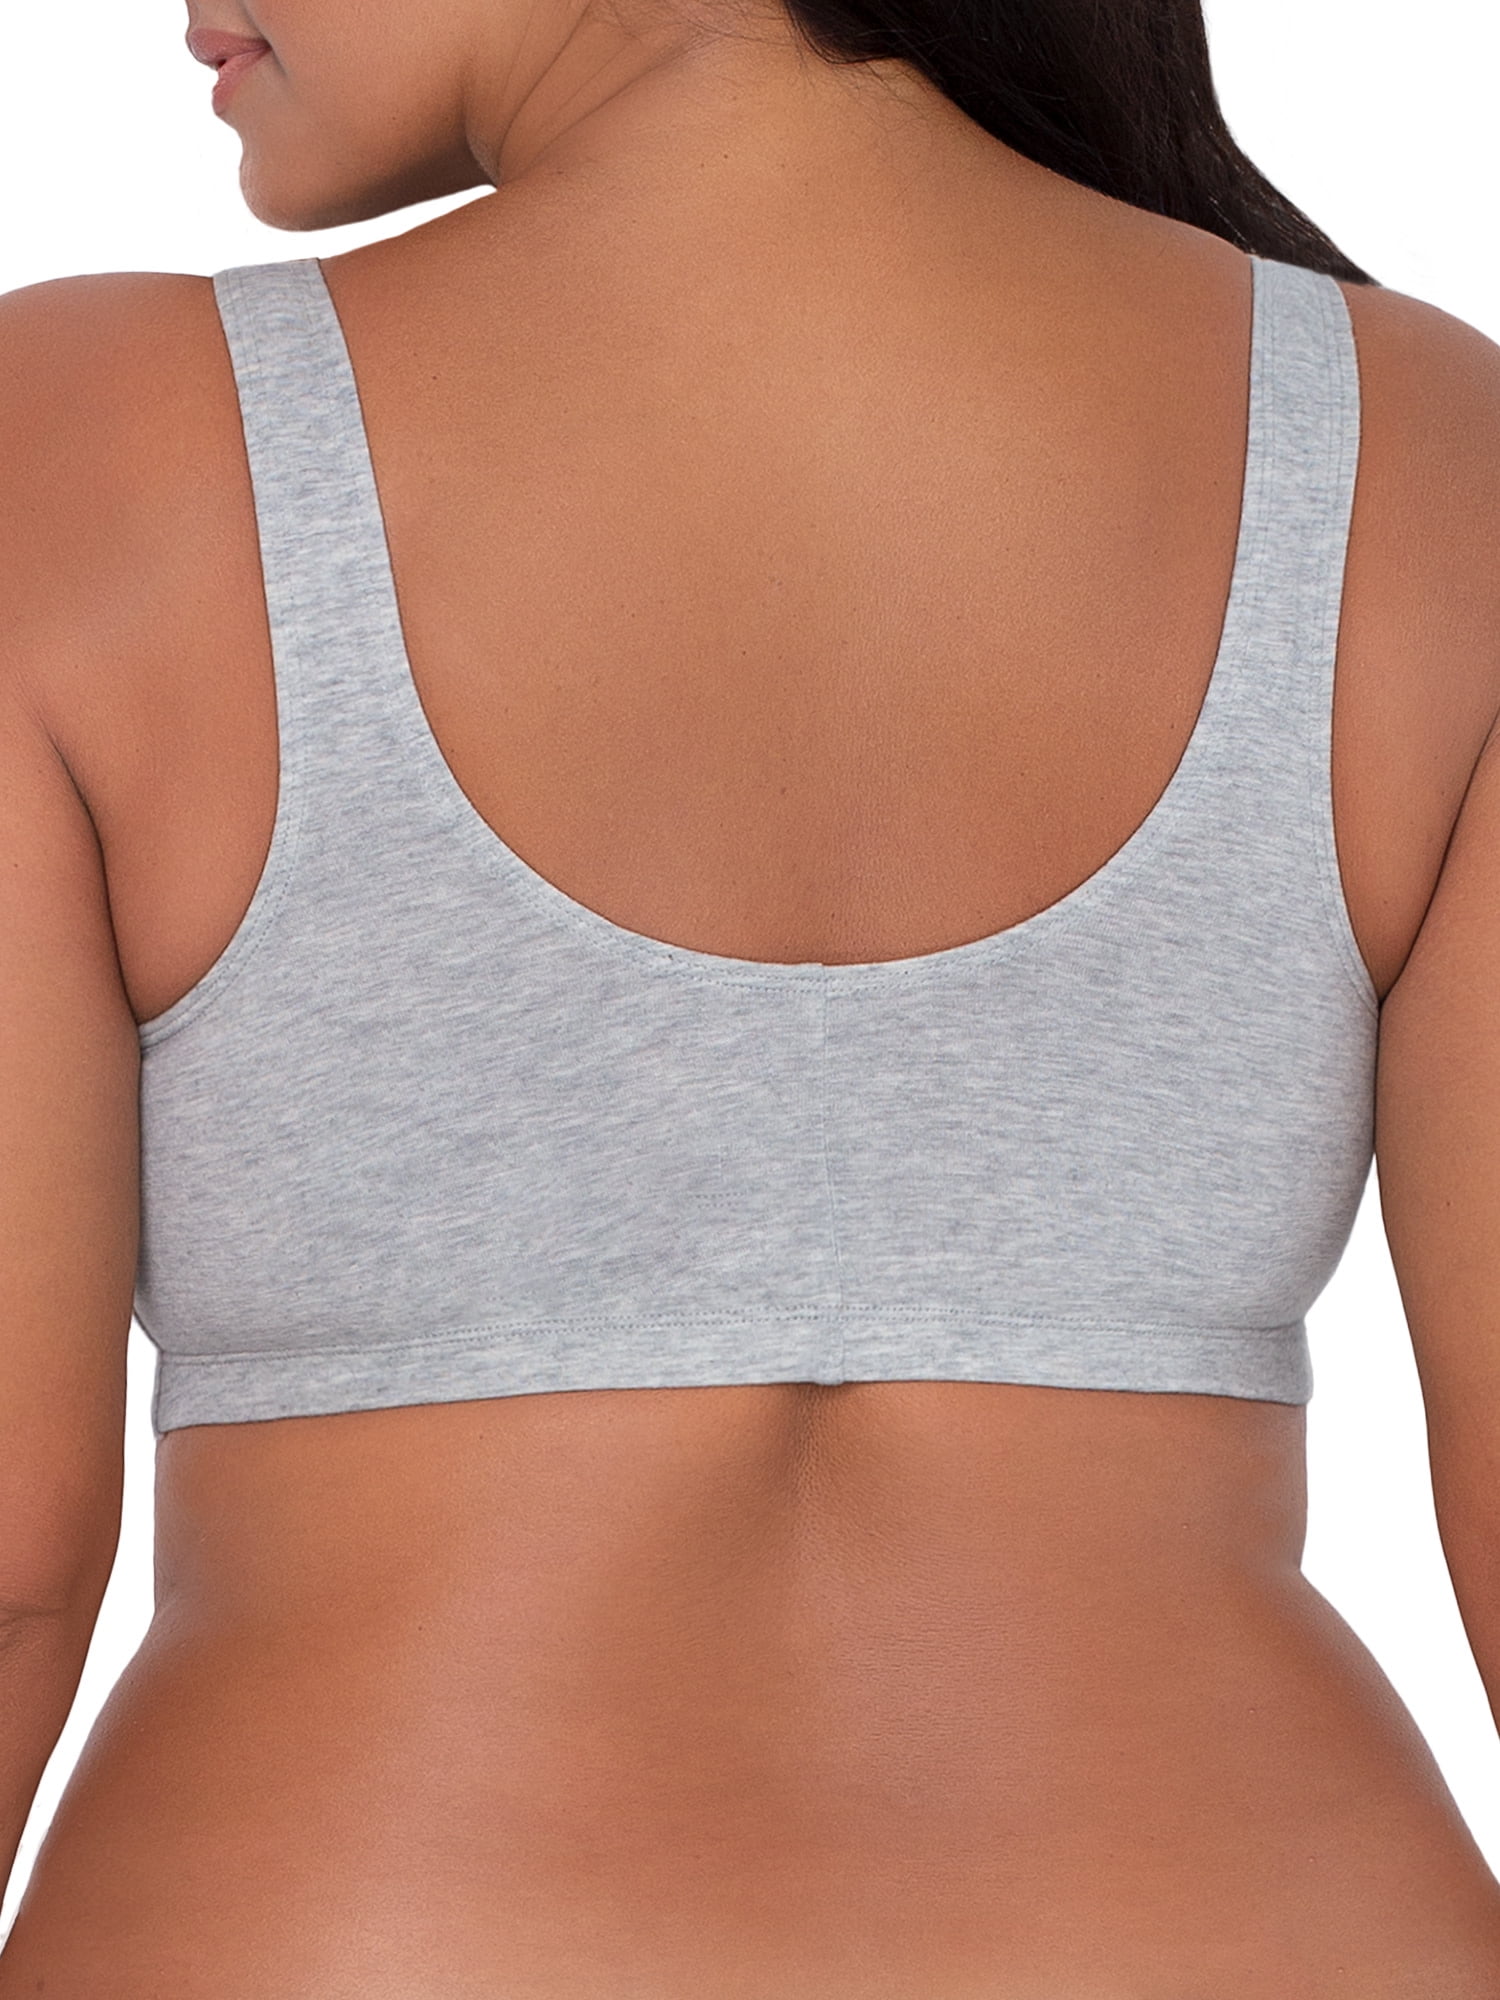 Buy MOONMALLS Everyday Bras - Cotton Soft Cup Wireless Front Close Bras of  Women(30-46B/C) (XXL 36BC 36D 38AB 38CD, Grey) at